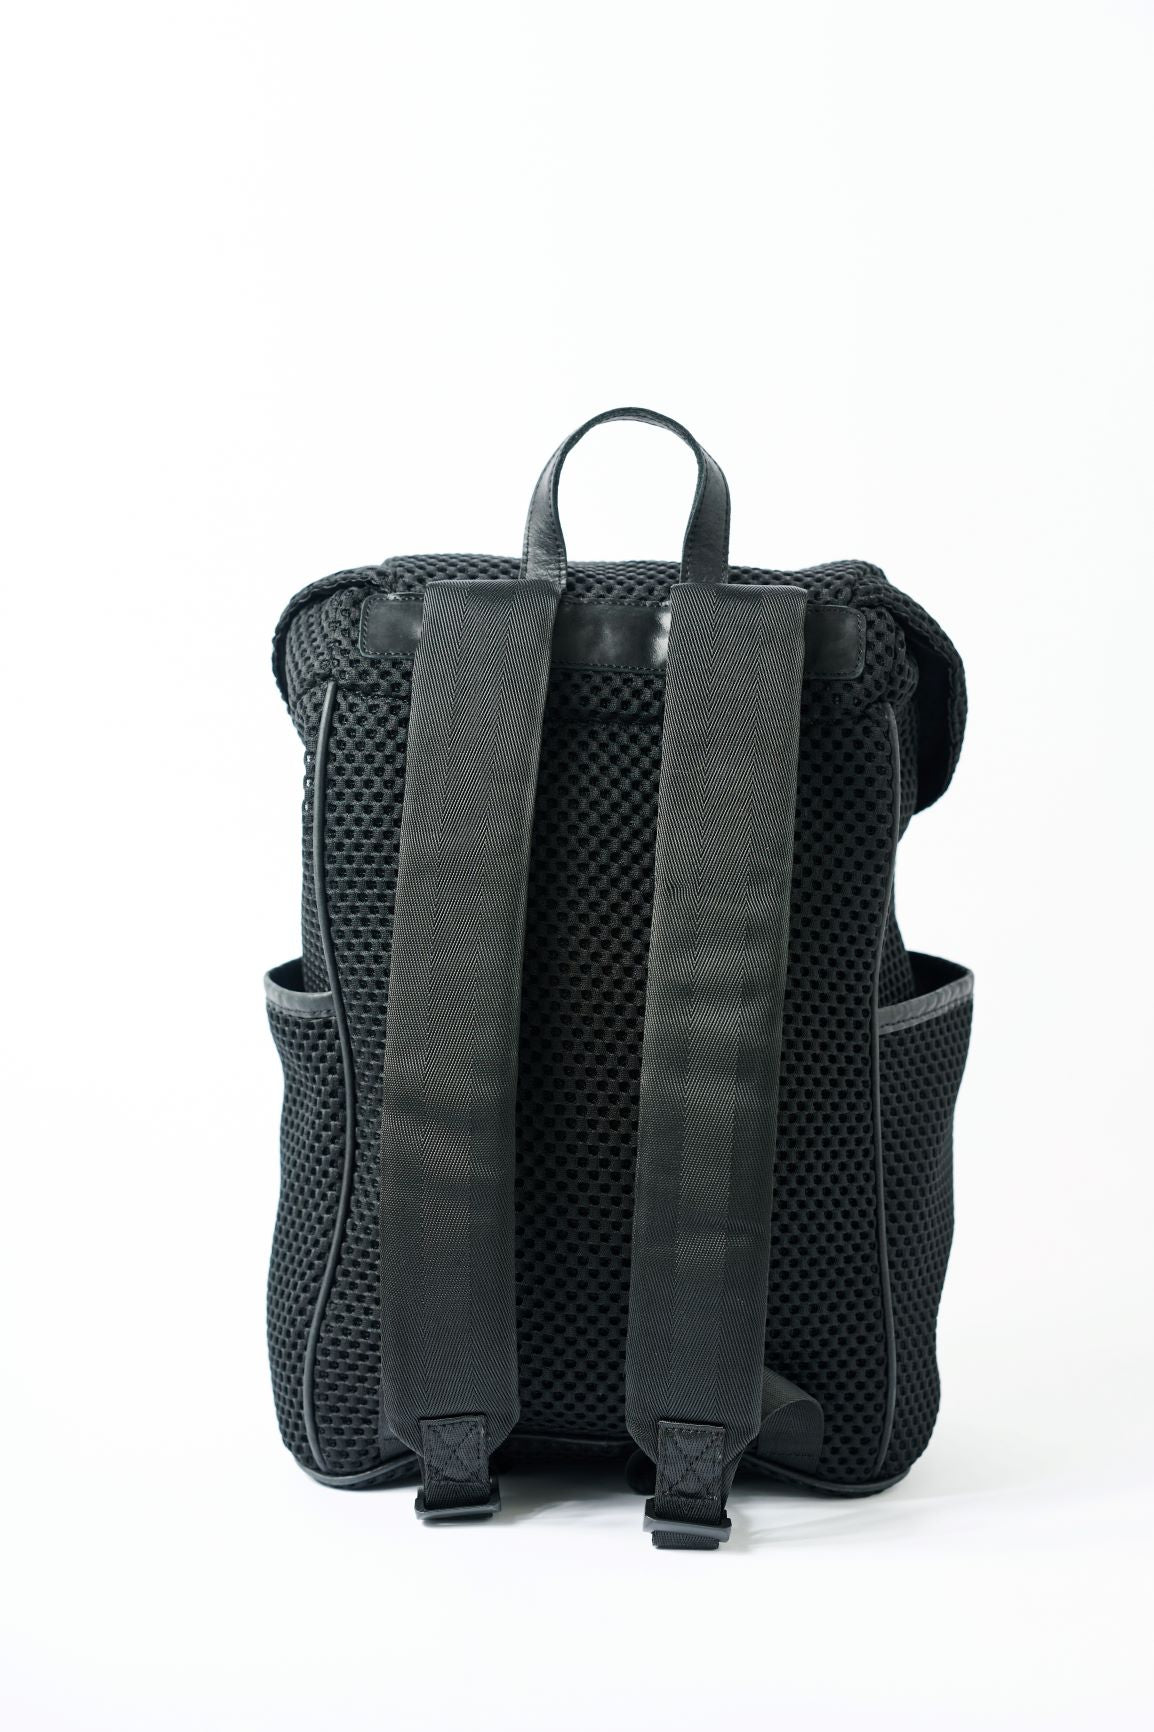 Back view of a black mesh backpack with leather details and shiny silver drawstring top.